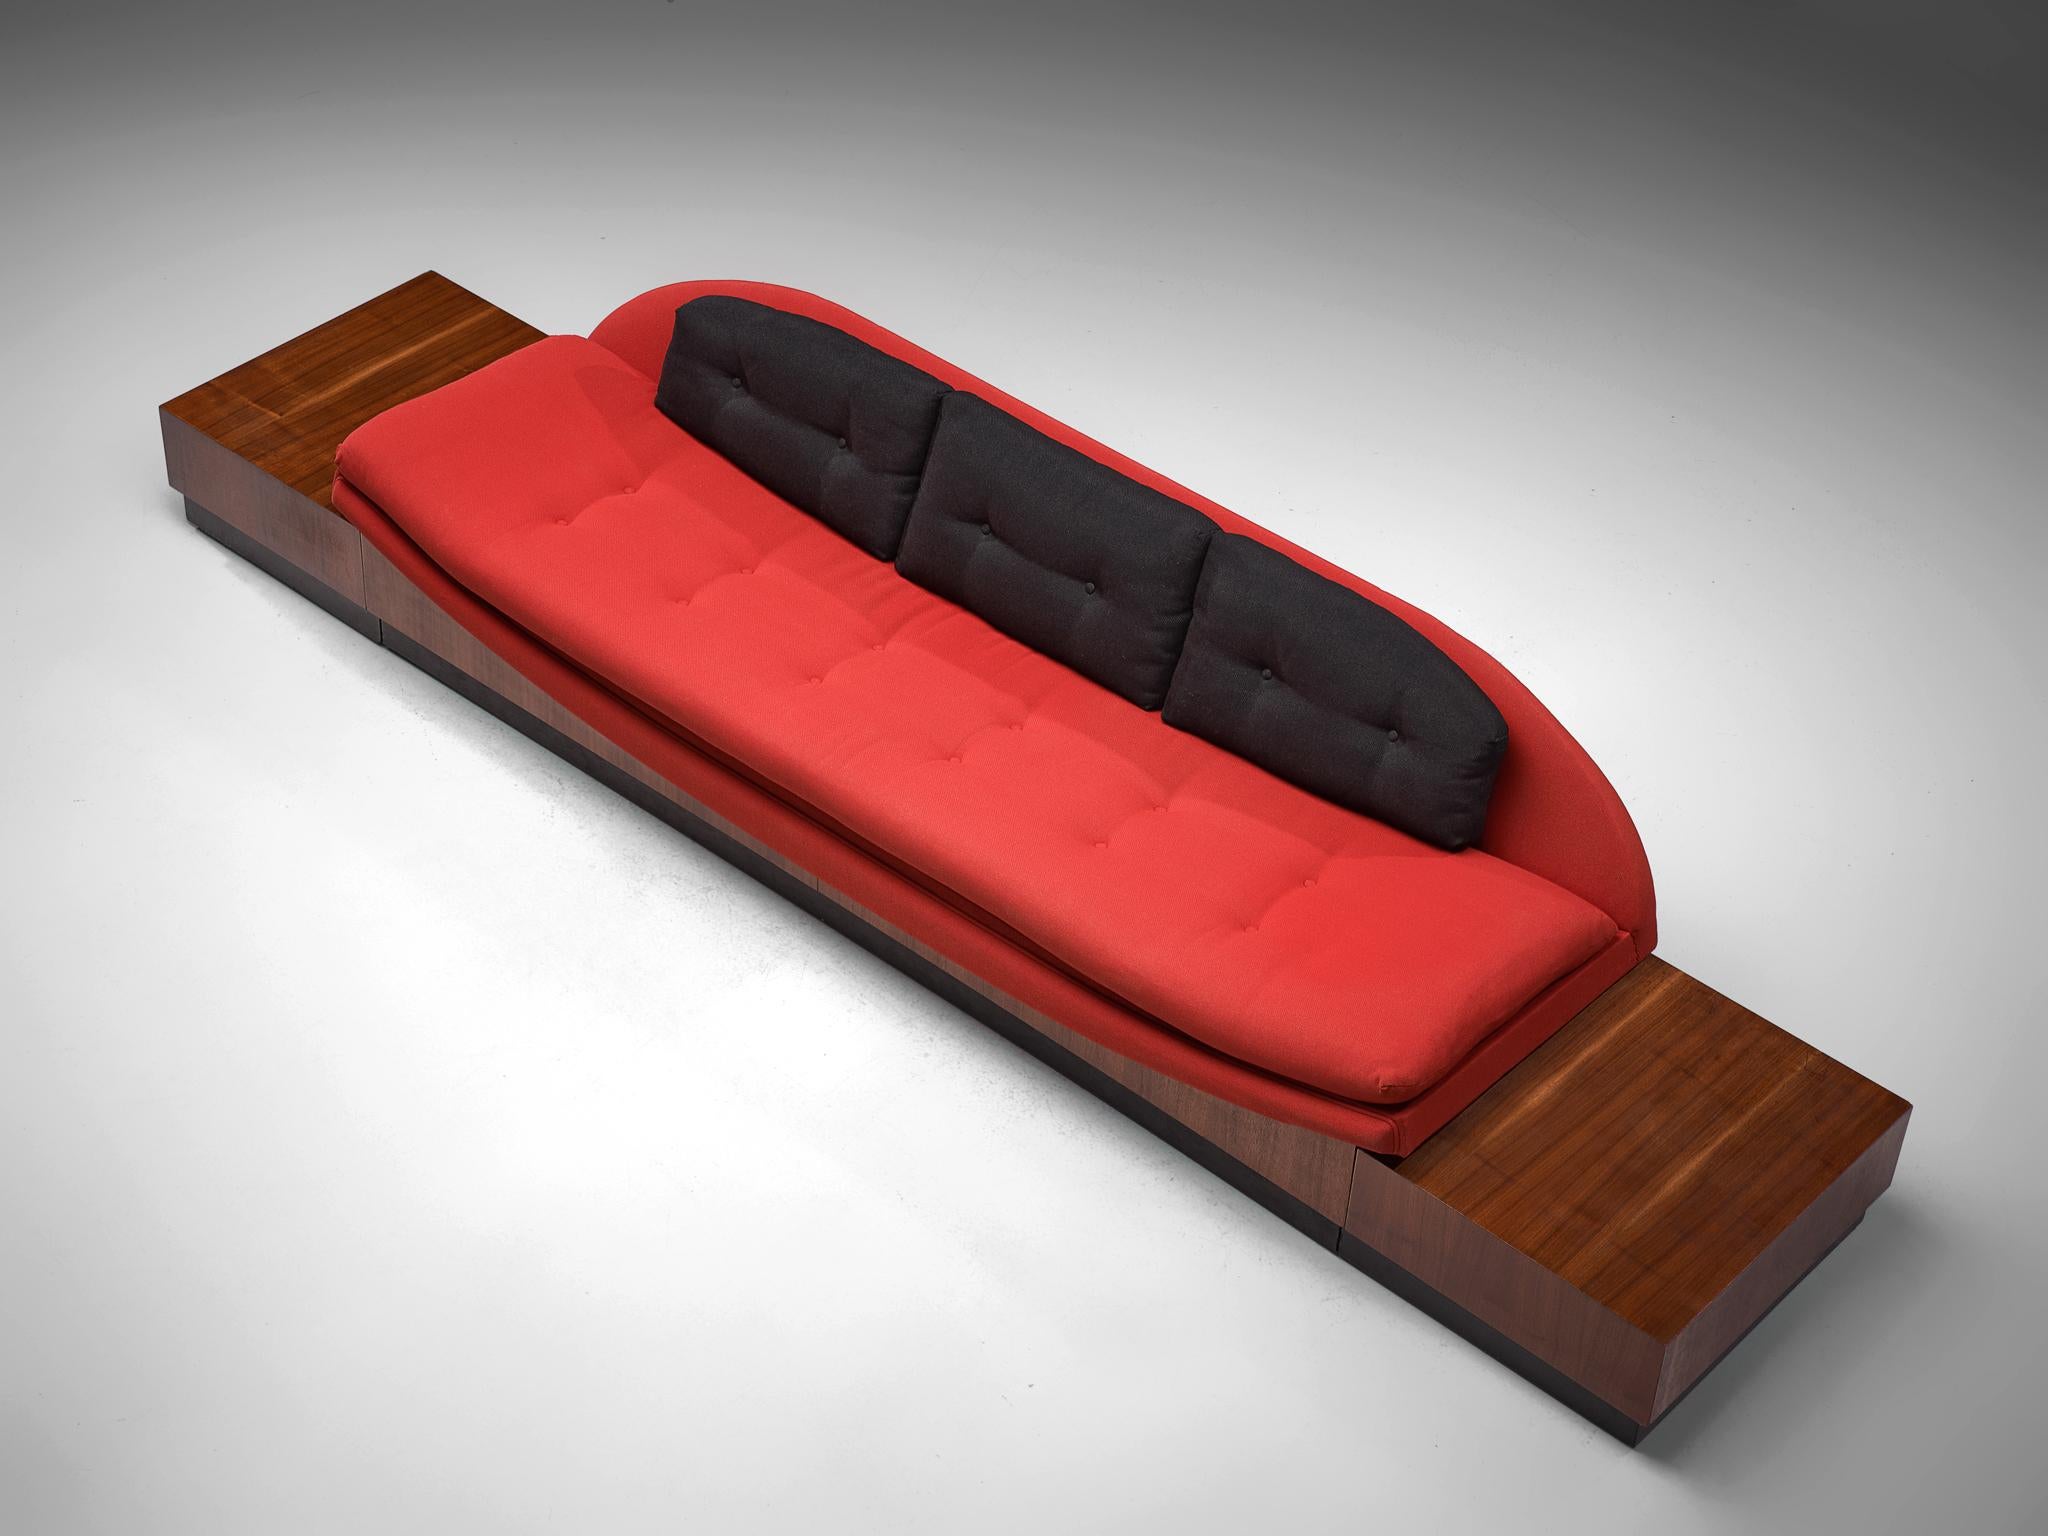 Adrian Pearsall for Craft Associates, Platform Gondola sofa, fabric, walnut and wood, United States, 1960s.

A wonderful sofa that features combination of two great sofa models by Adrian Pearsall; the Gondola sofa and the Platform sofa. The result